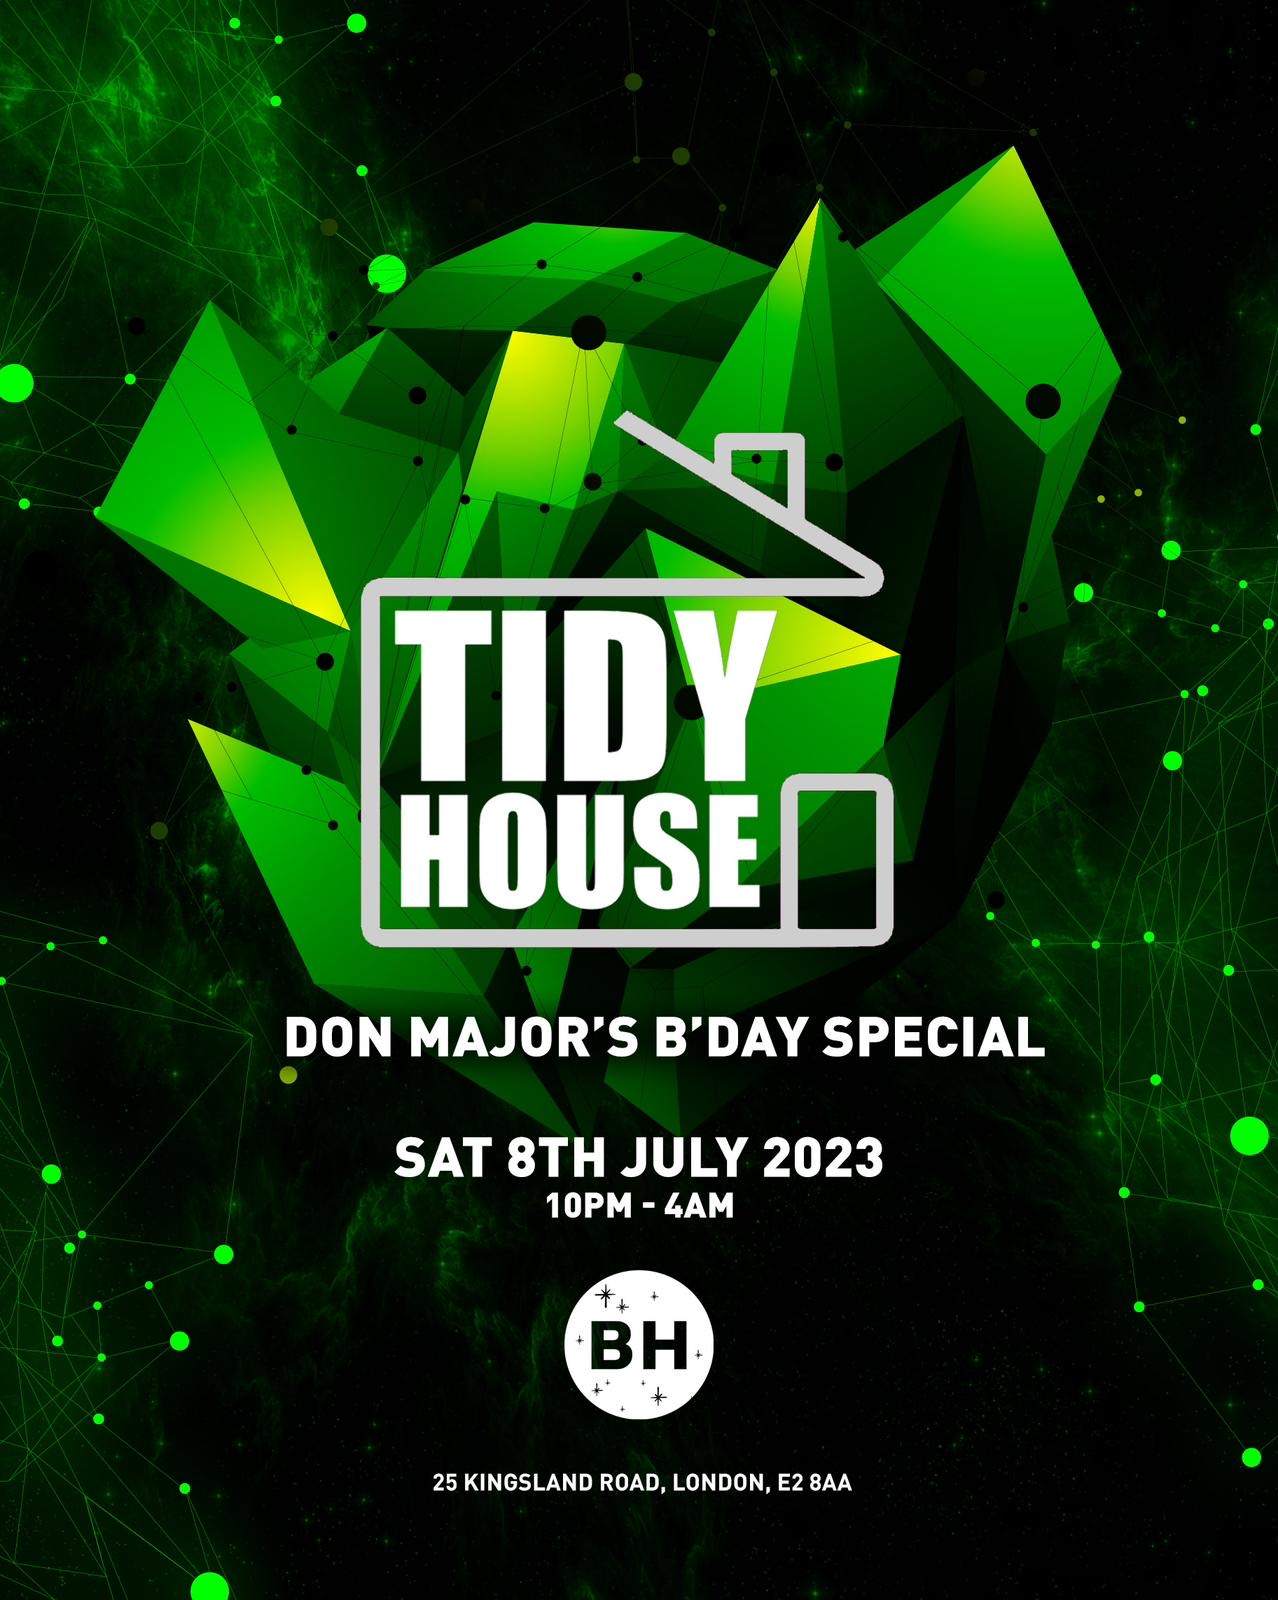 Tidy House Don Major's Birthday Special - フライヤー裏